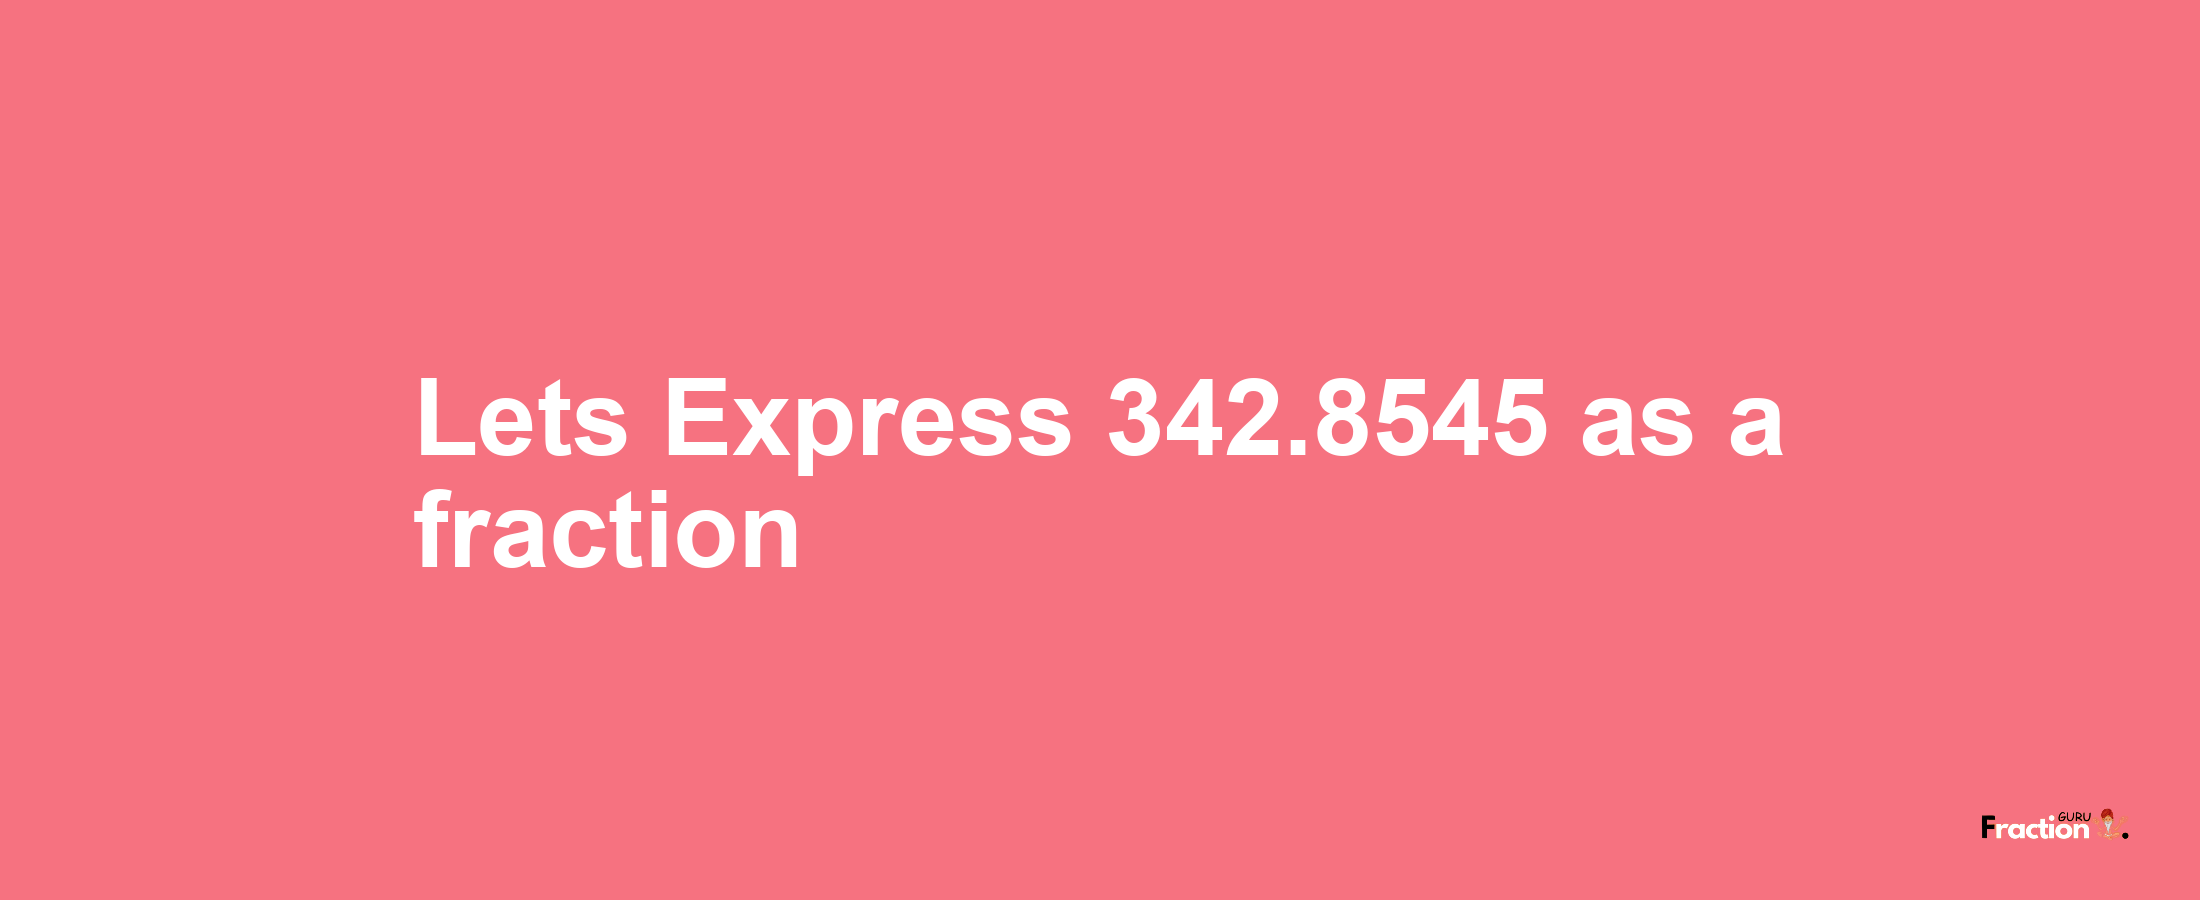 Lets Express 342.8545 as afraction